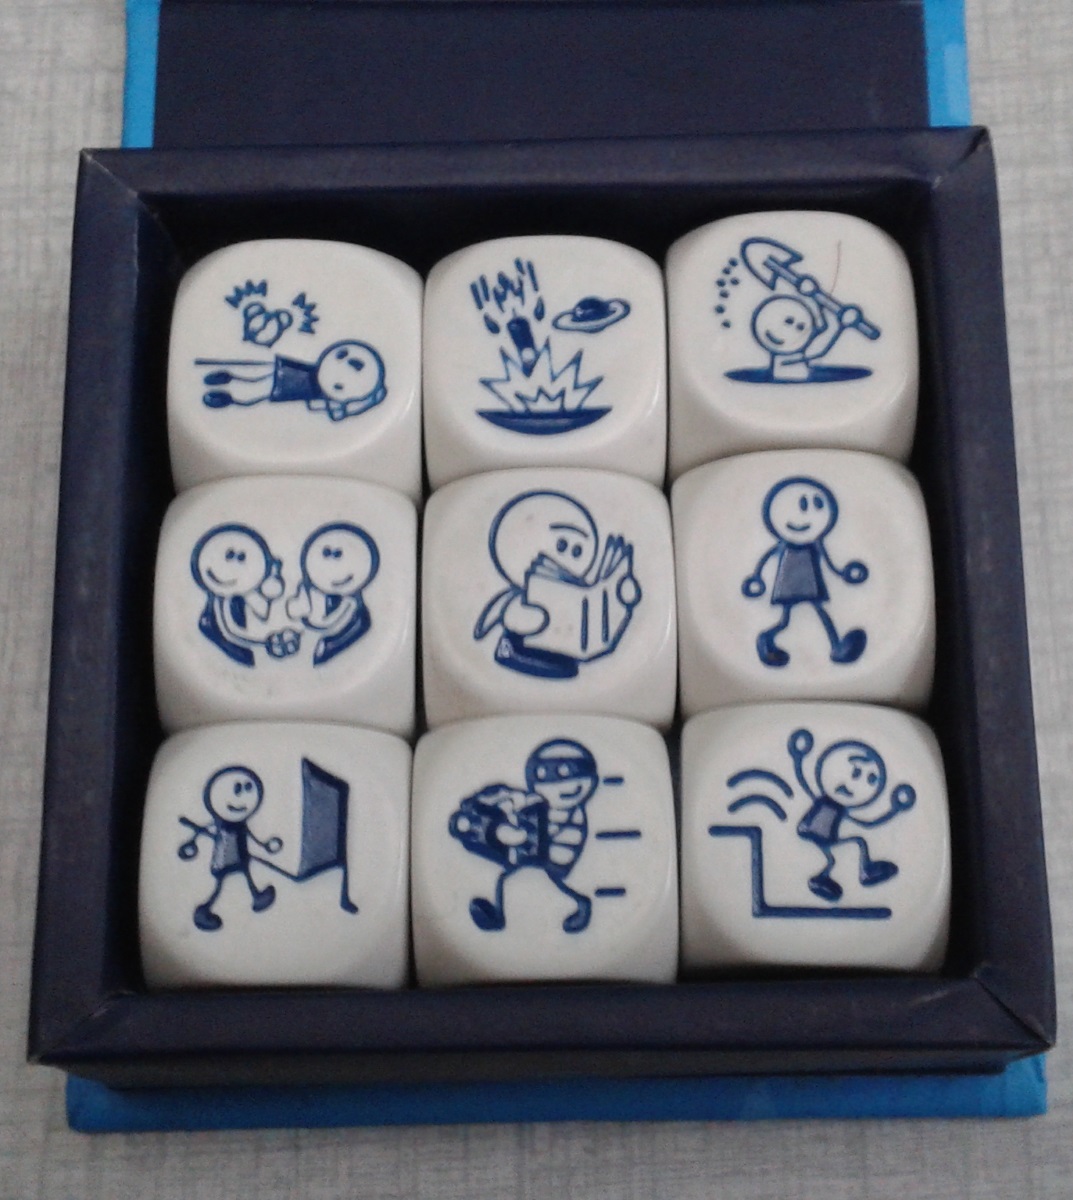 Rory’s Story Cubes